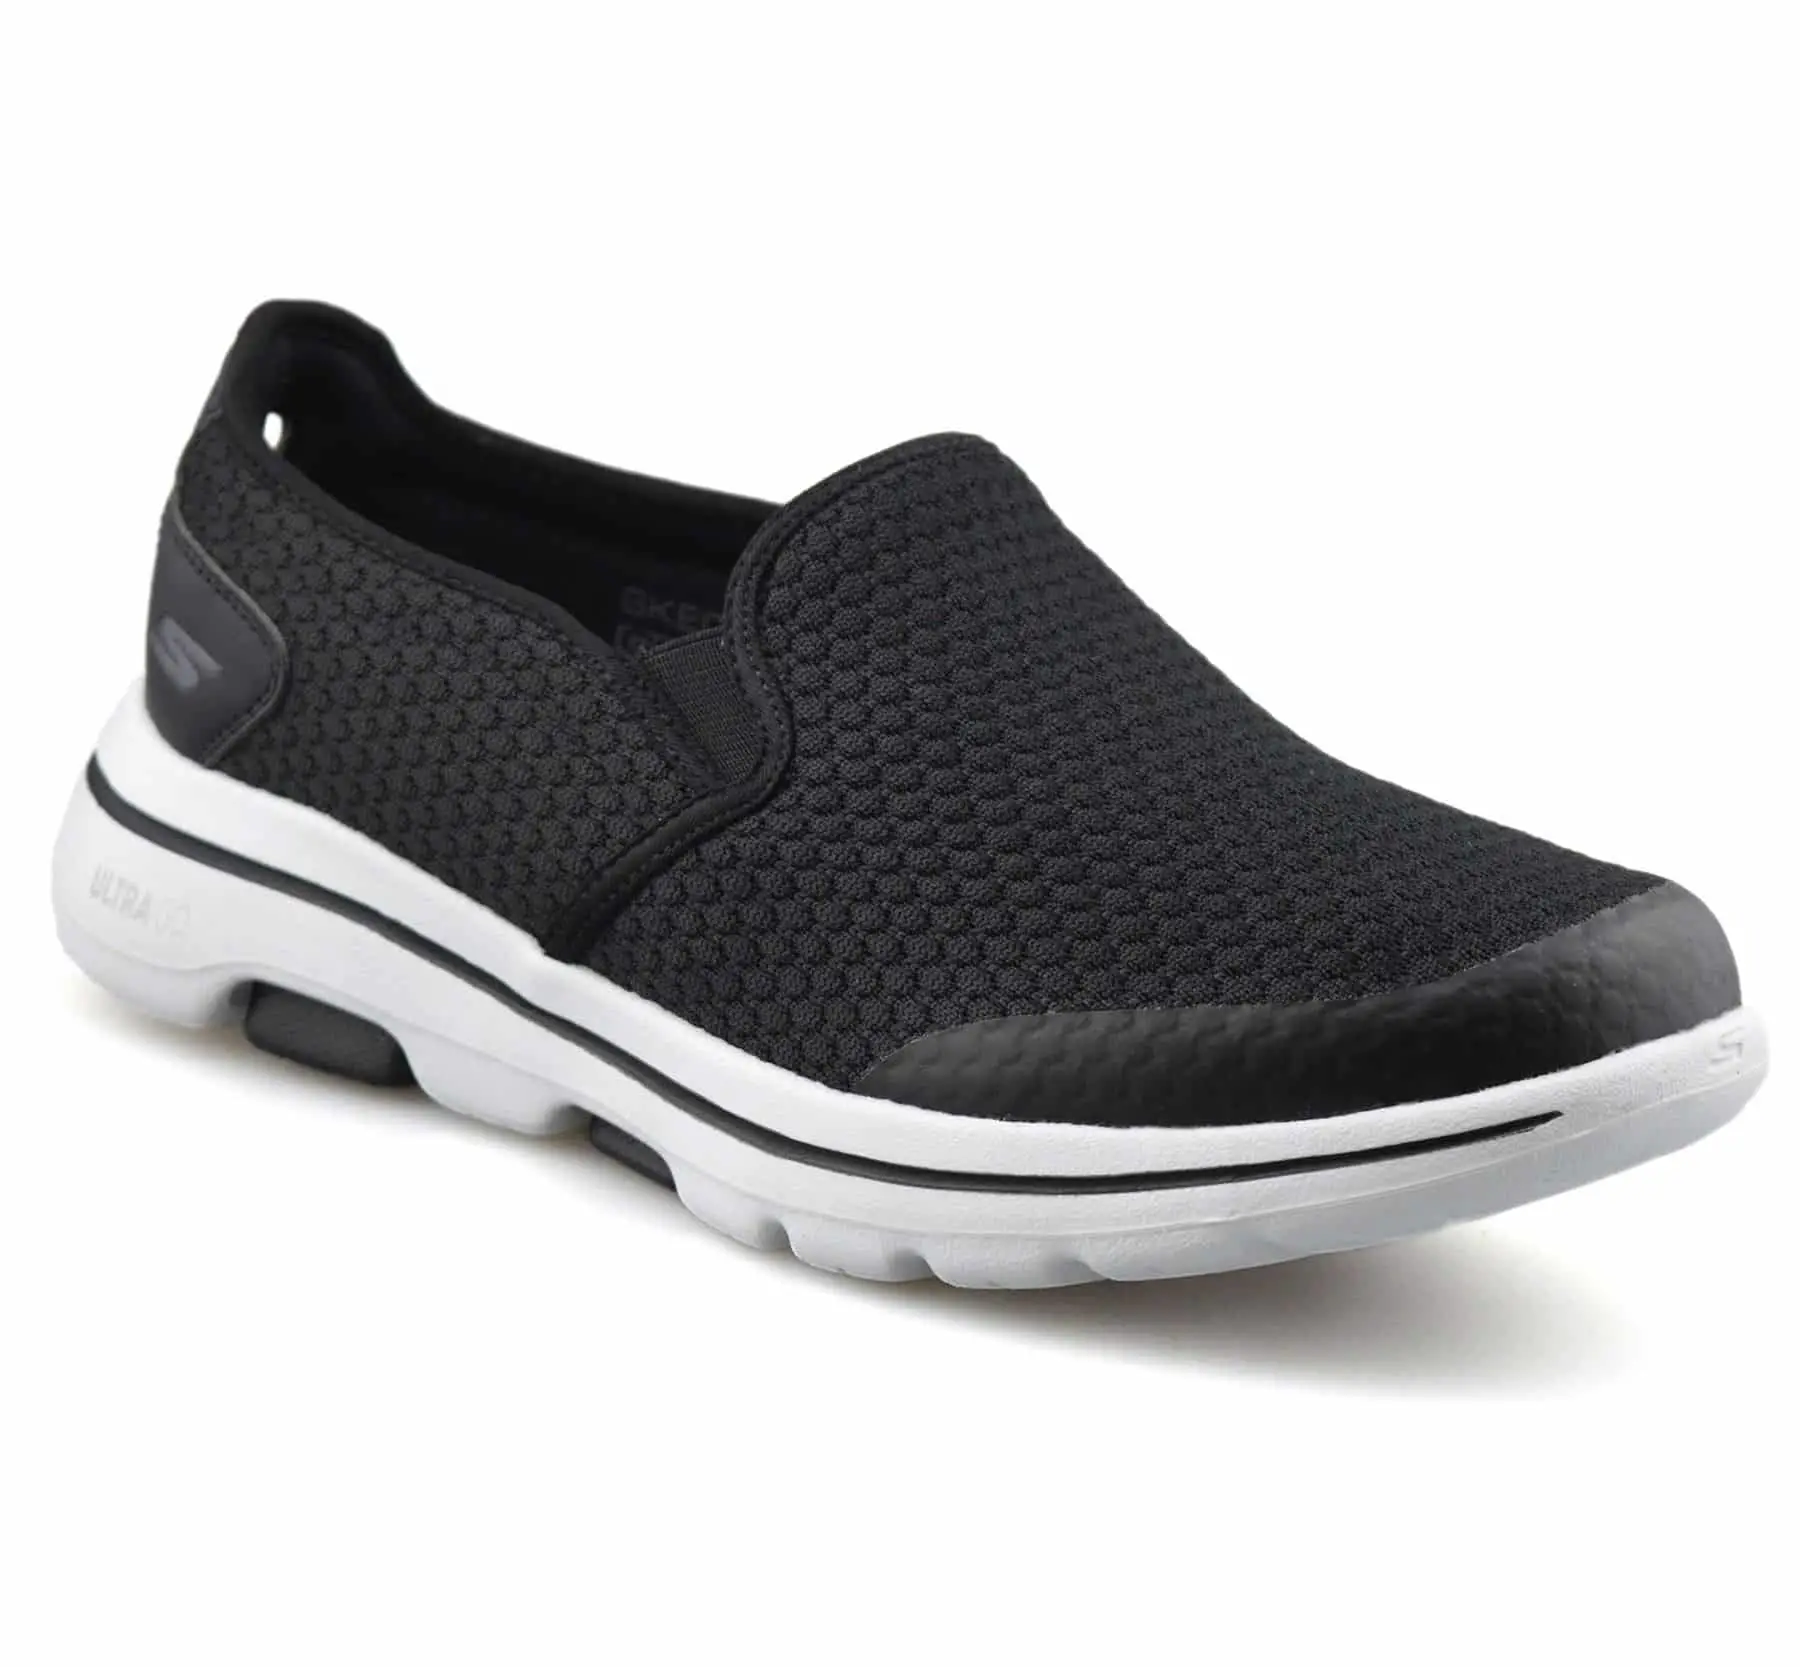 Mens Skechers GOwalk New Slip On Extra Wide Fit Walking Gym Trainers ...